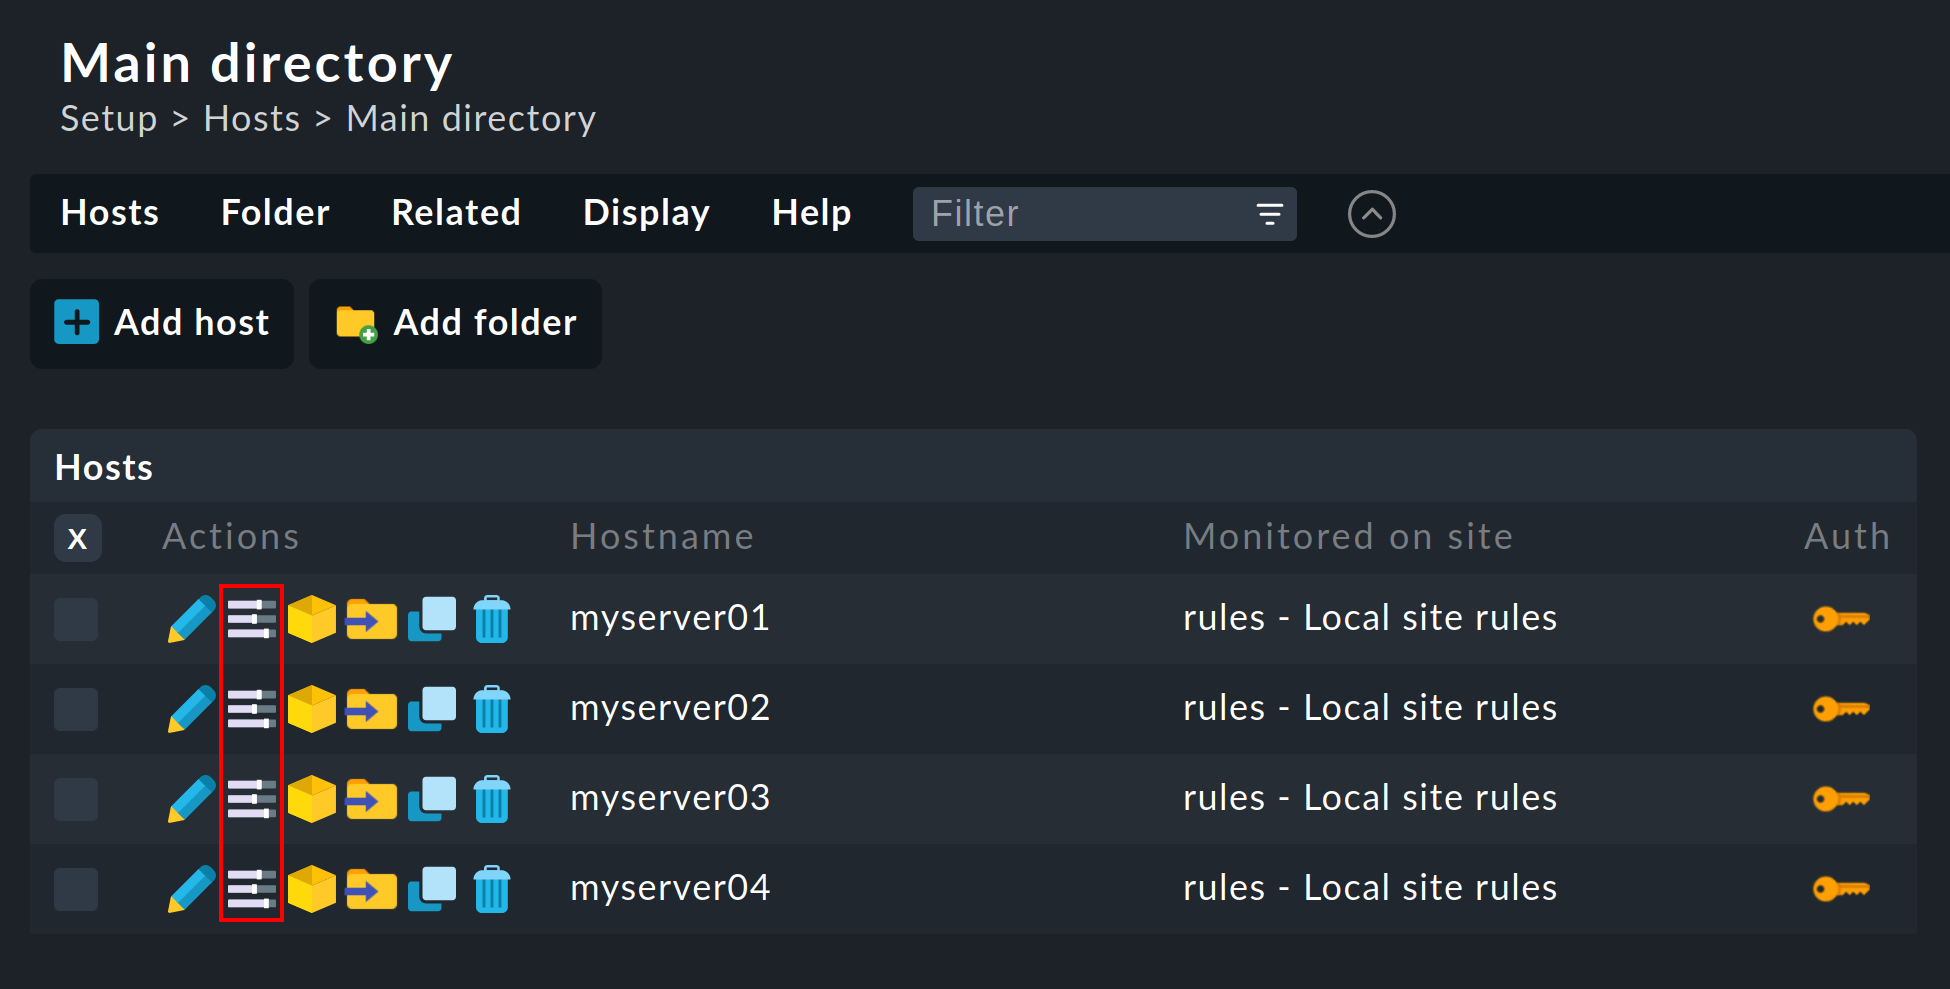 List of some hosts in the setup menu, with a highlighting of the button for host parameters.